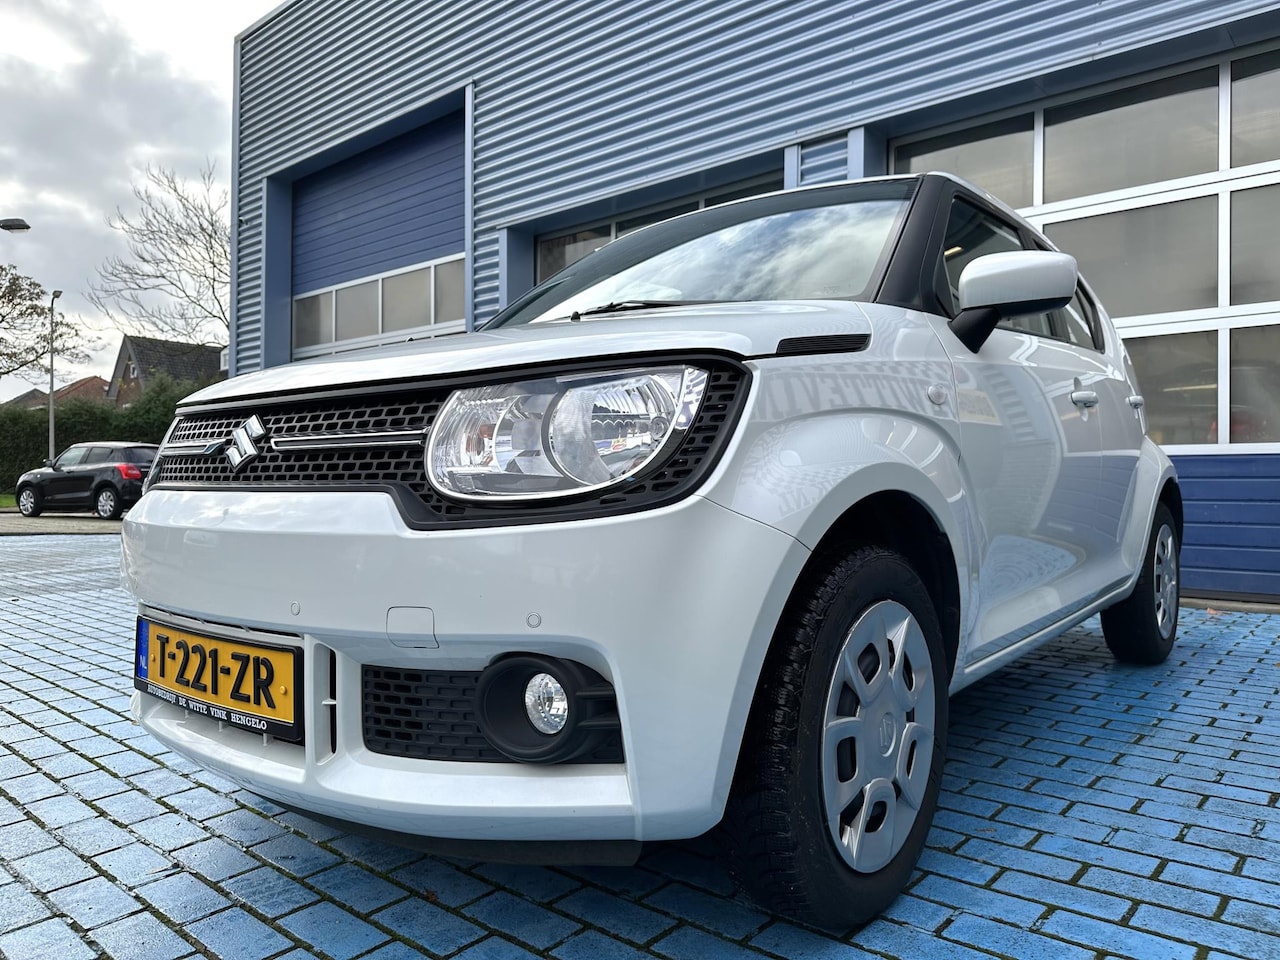 Suzuki Ignis - 1.2 Comfort PDC V+A HOGE INSTAP AIRCO PDC BOVAG - AutoWereld.nl